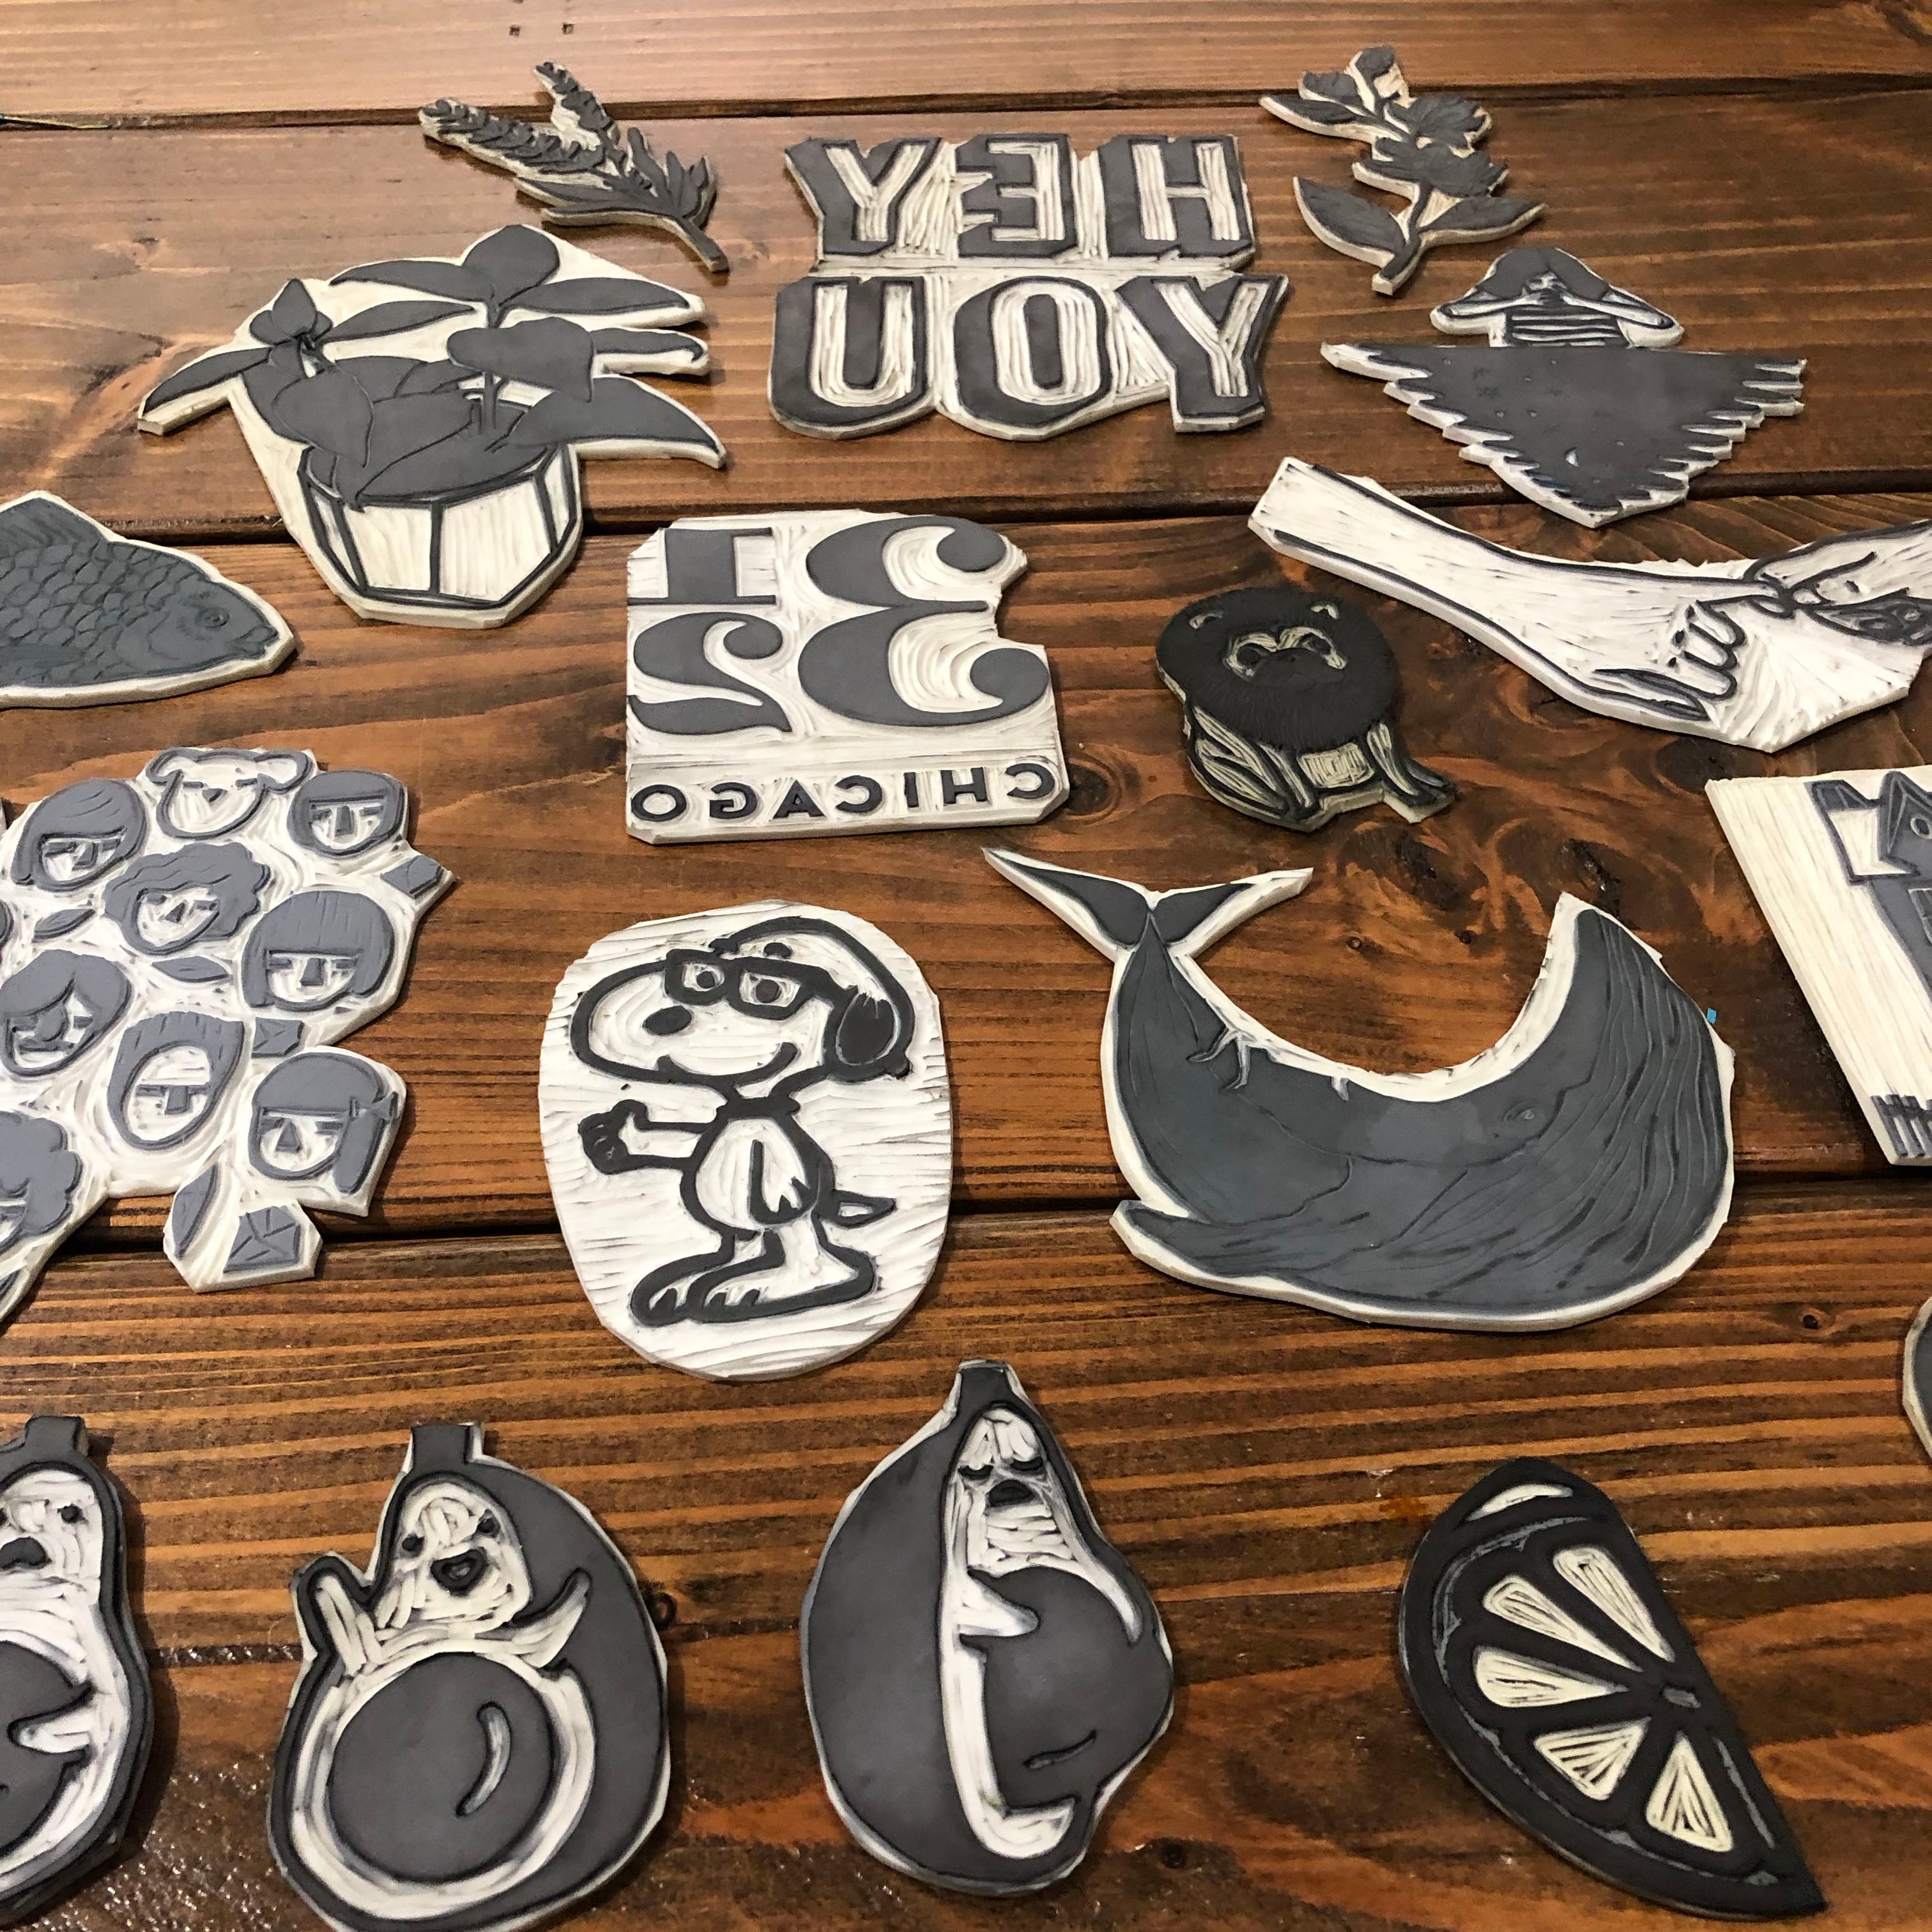 Private Linocut Stamp Workshop $48/person